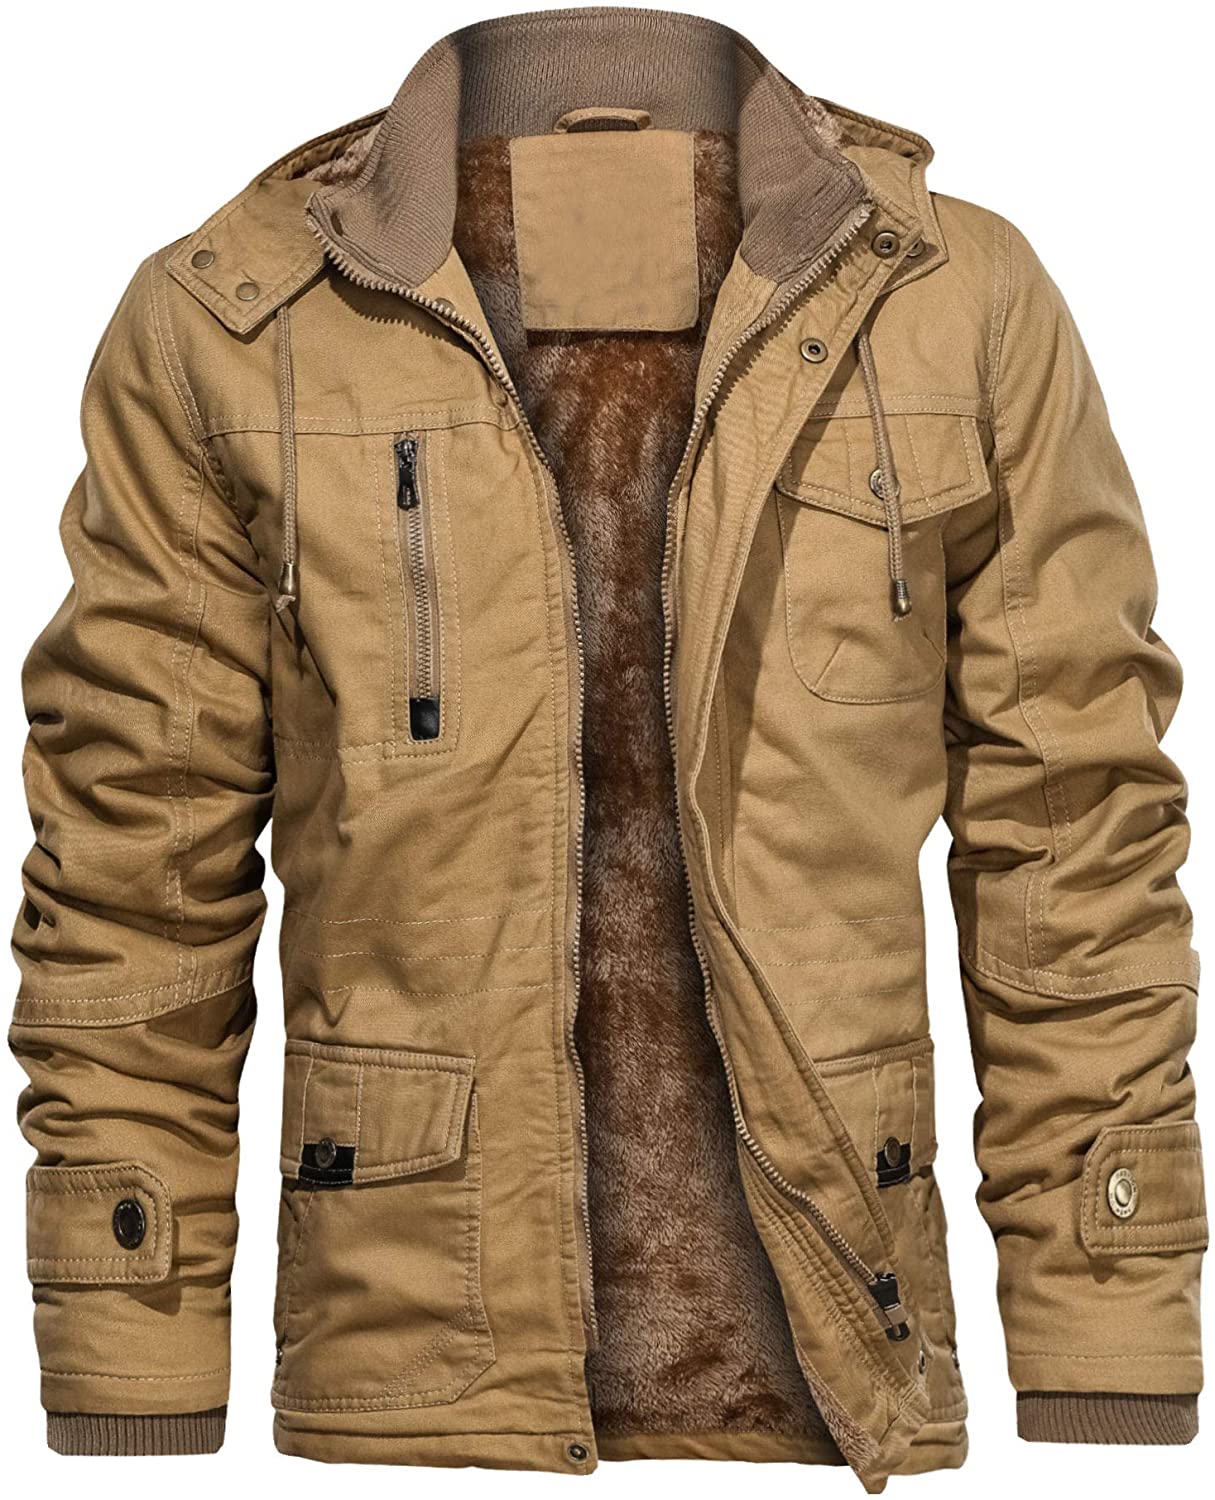 CHEXPEL Men's Thick Winter Jackets with Hood Fleece Lining